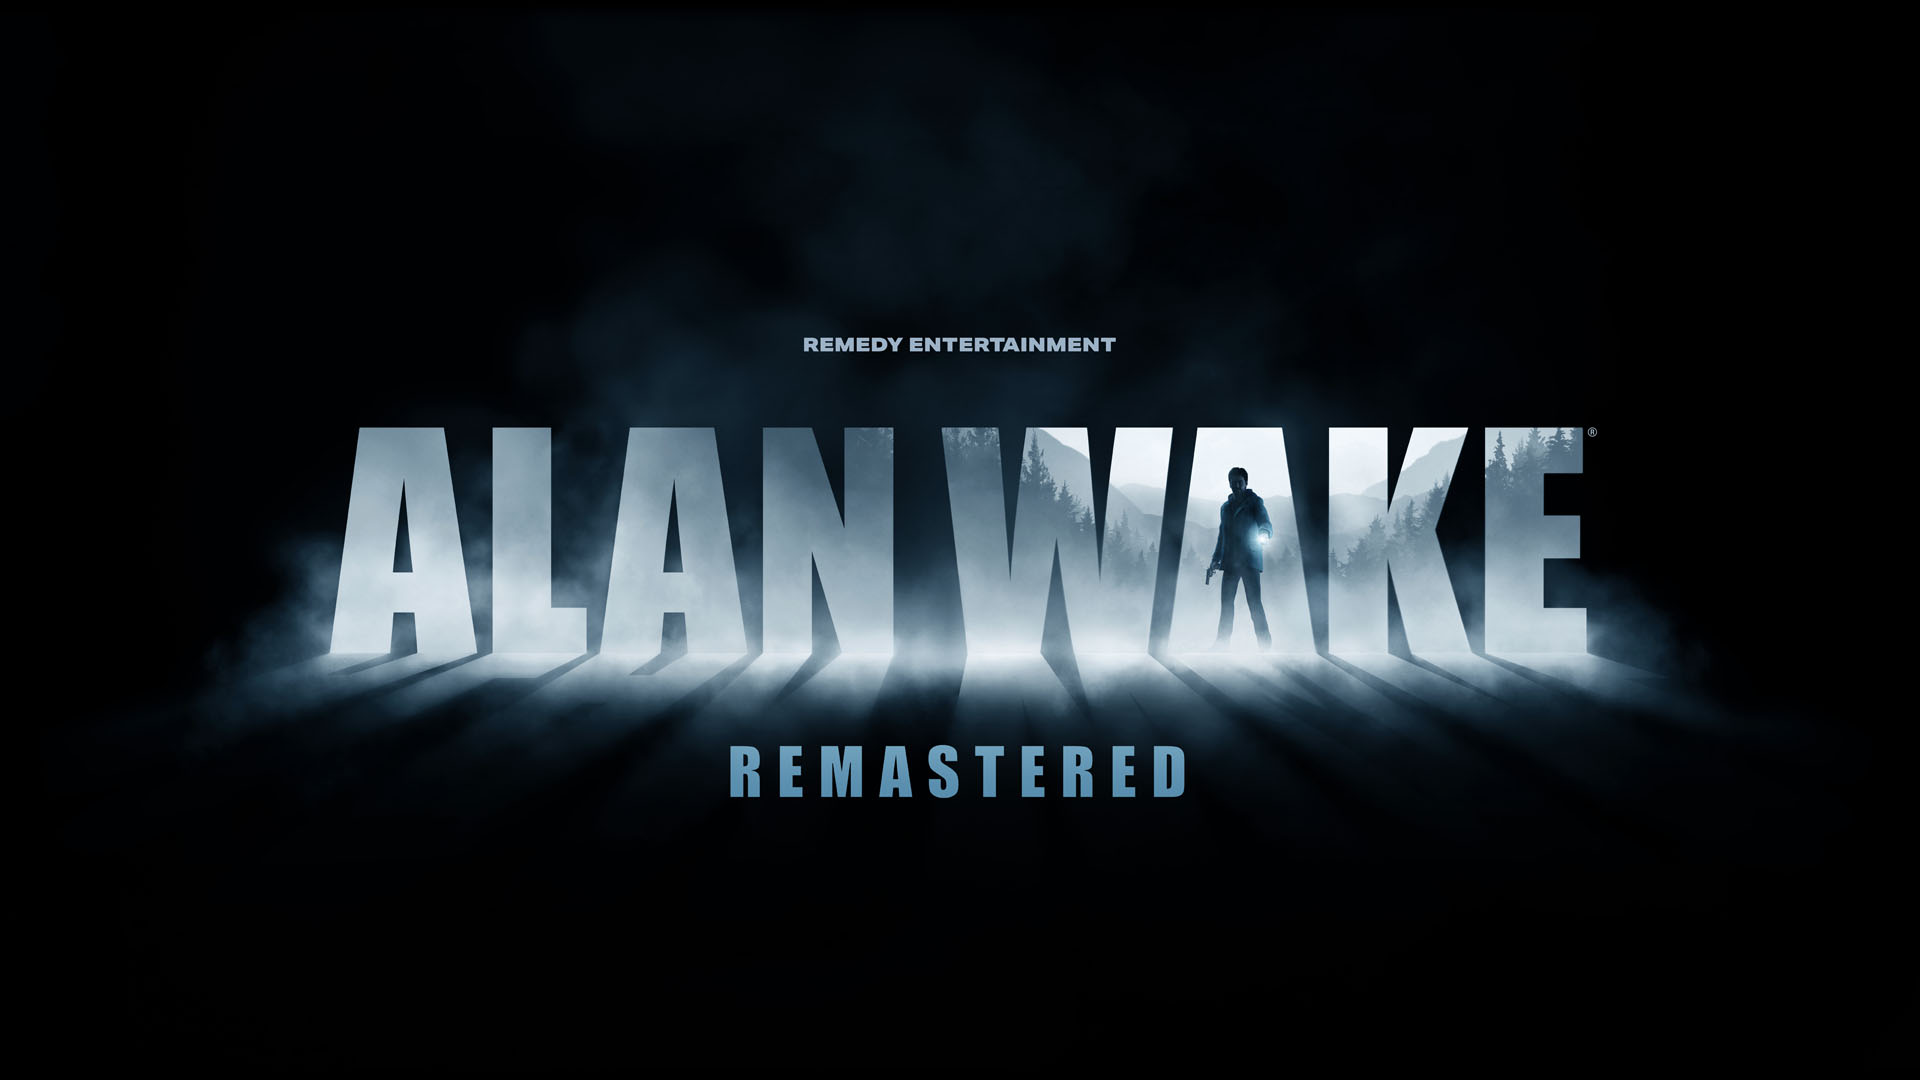 If I bought Alan wake on steam before the remastered, is there a